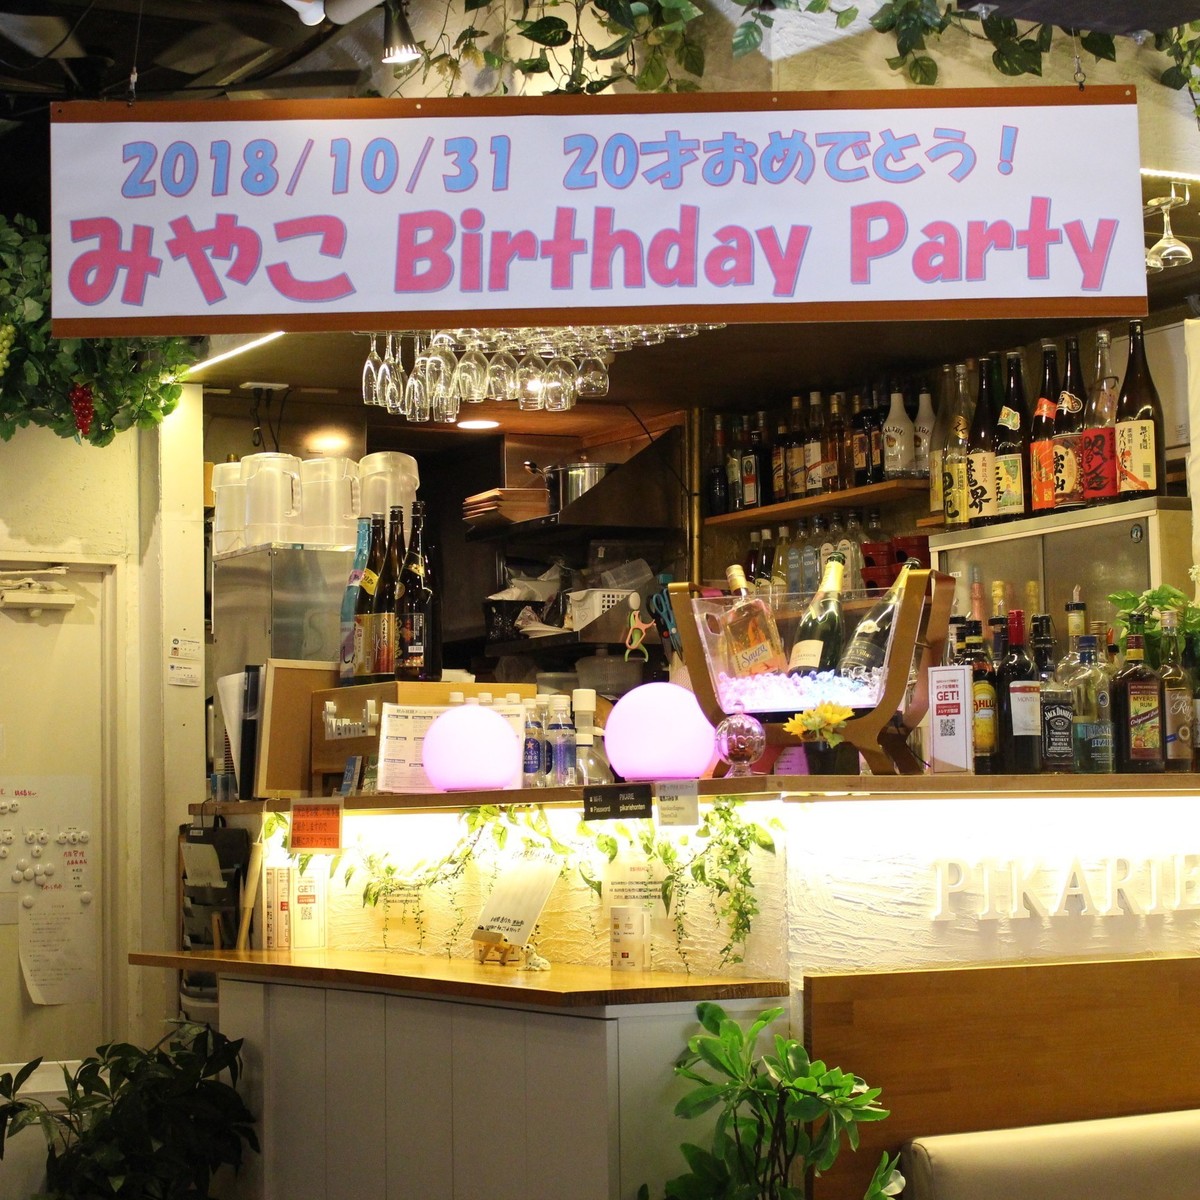 Recommended for private off-line meetings in Shibuya Shibuya Picarie main store! Free banner creation service ♪